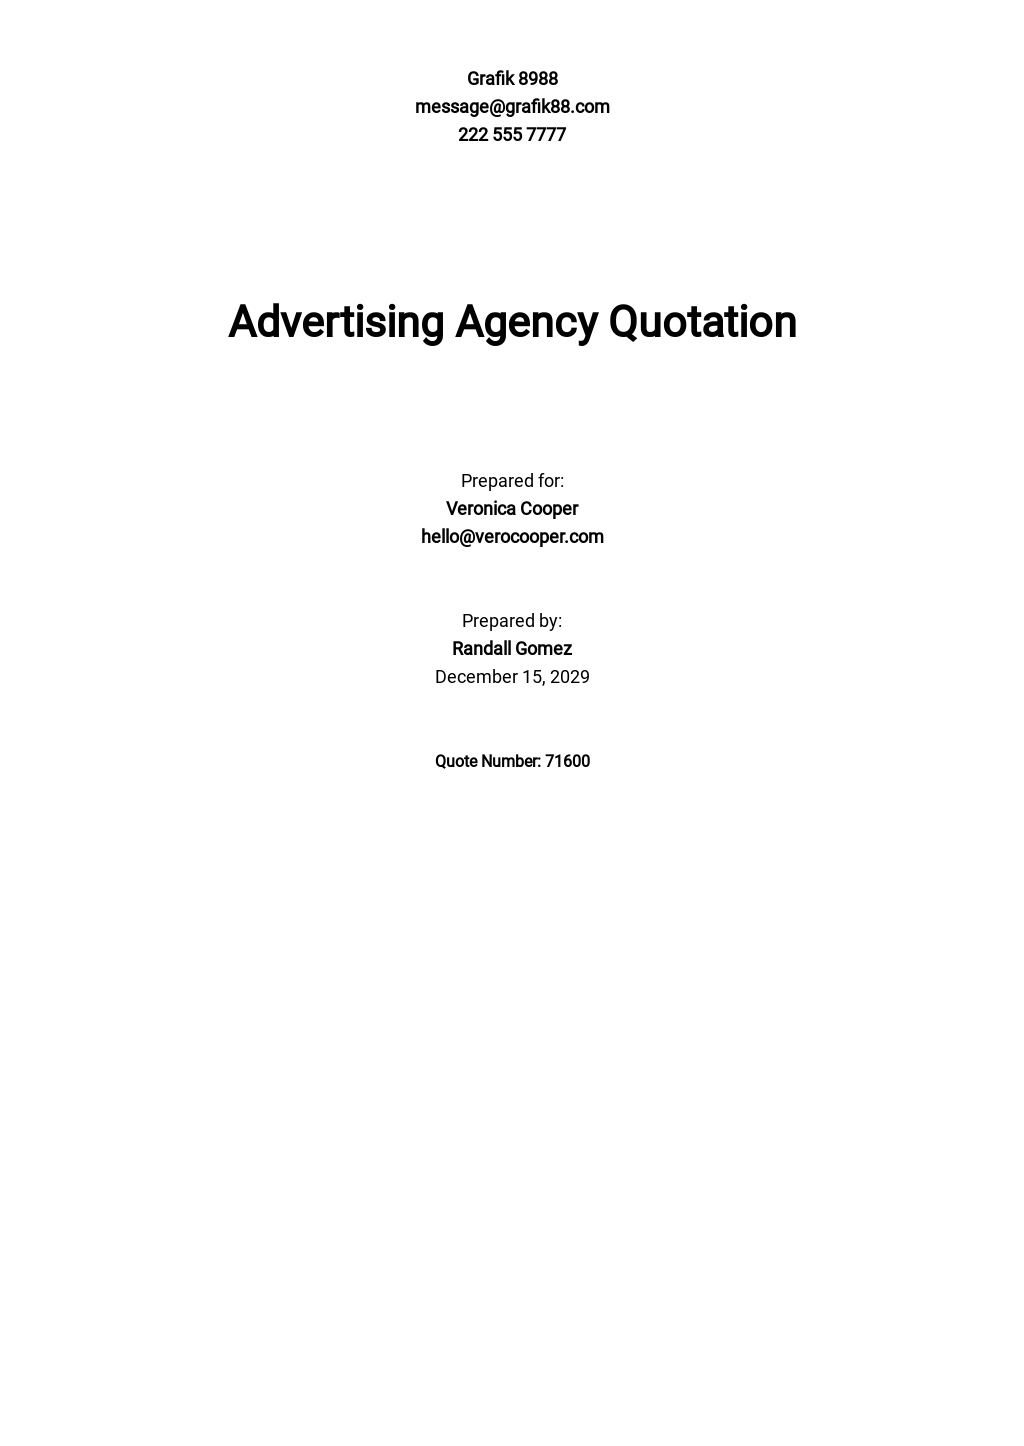 Advertising agency Quotation Template - Google Docs, Google Sheets, Excel, Word